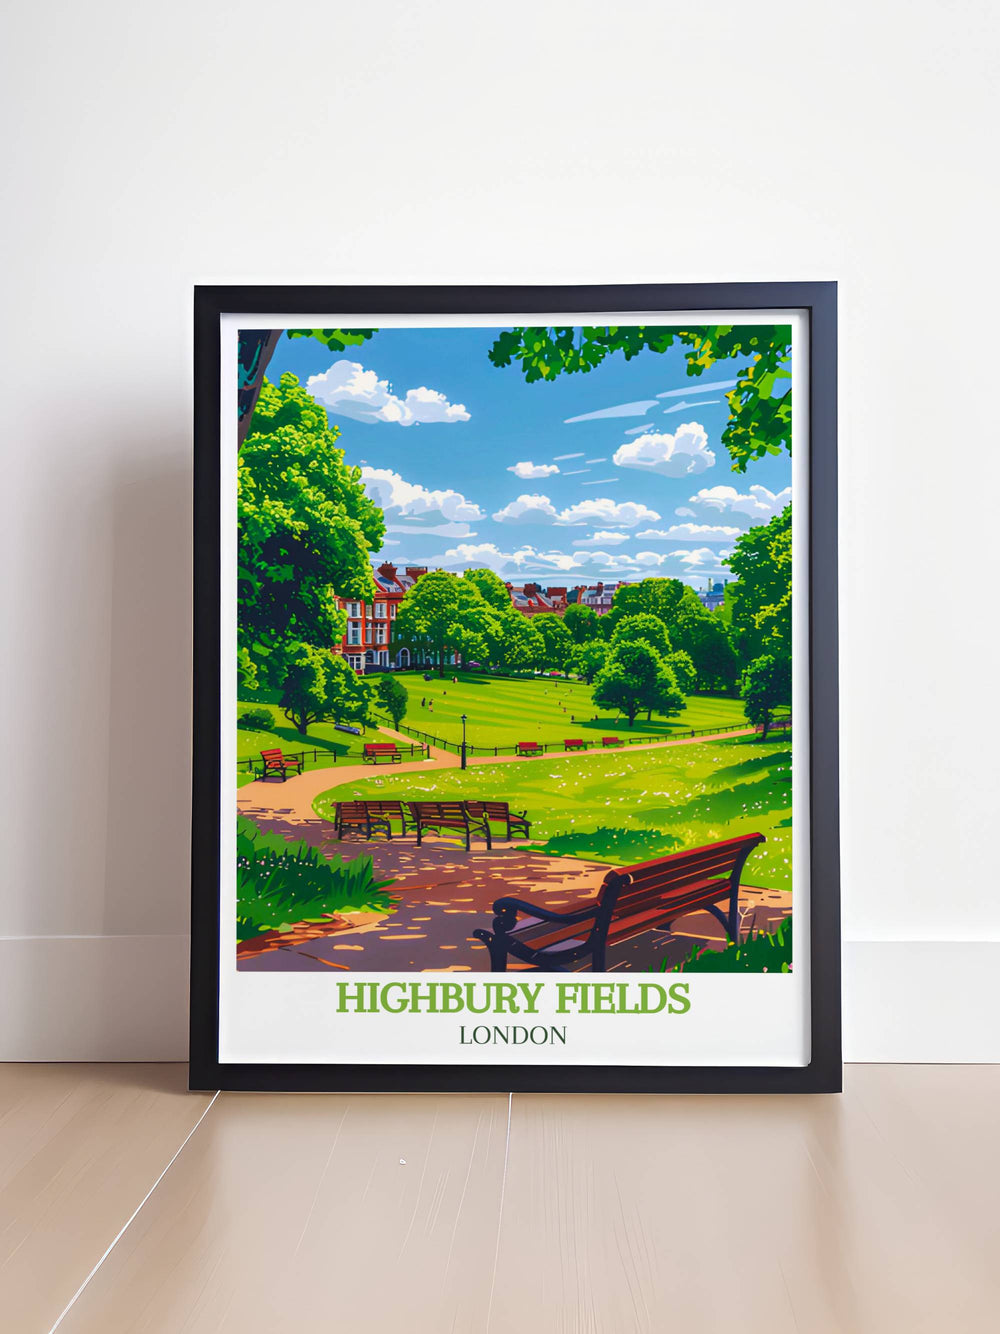 Vintage poster of Highbury Fields with vivid illustrations of the park and its vibrant atmosphere, ideal for collectors